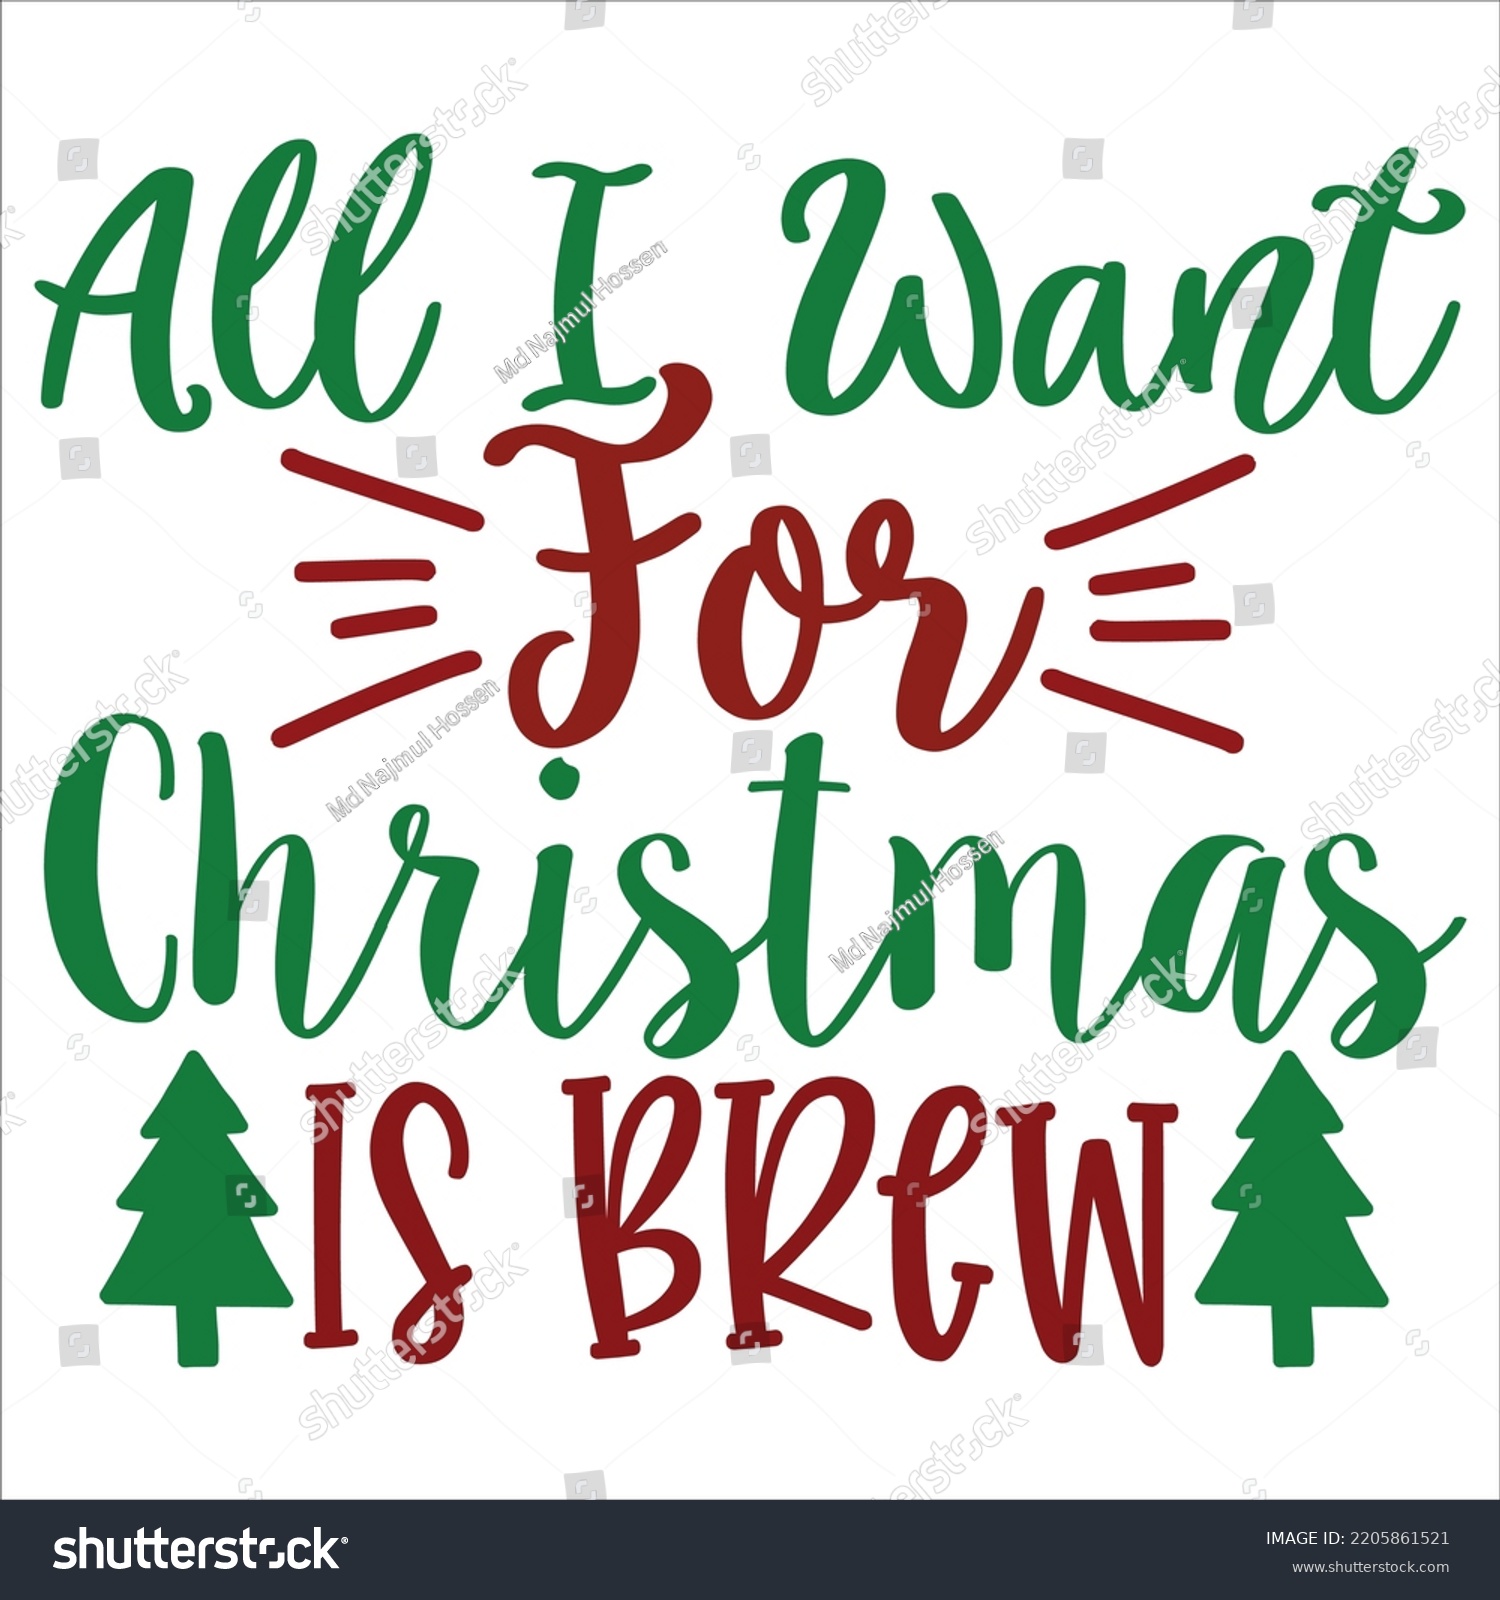 SVG of All I Want For Christmas Is Brew, Merry Christmas shirts, mugs, signs lettering with antler vector illustration for Christmas hand lettered, svg, Christmas Clipart Silhouette cutting svg